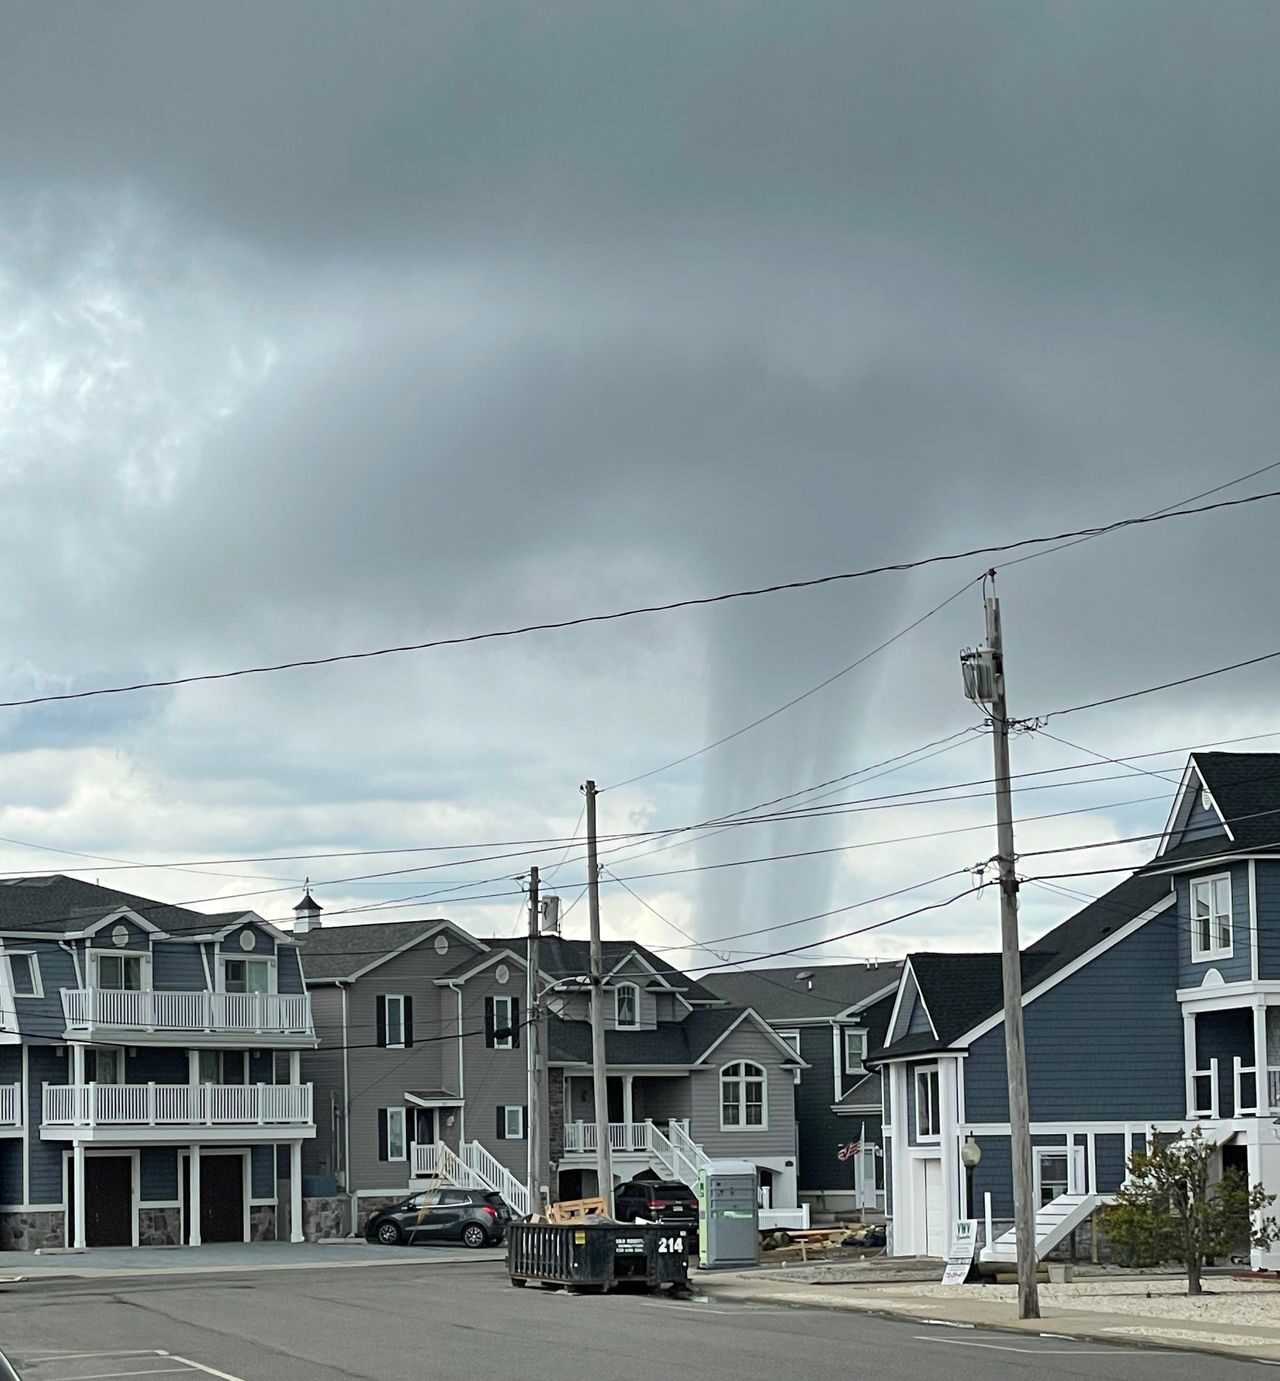 A waterspout formed Saturday in Barnegat Bay, the National Weather Service said. The massive funnel-like spout can be seen here from Bayside Terrace in Seaside Heights.